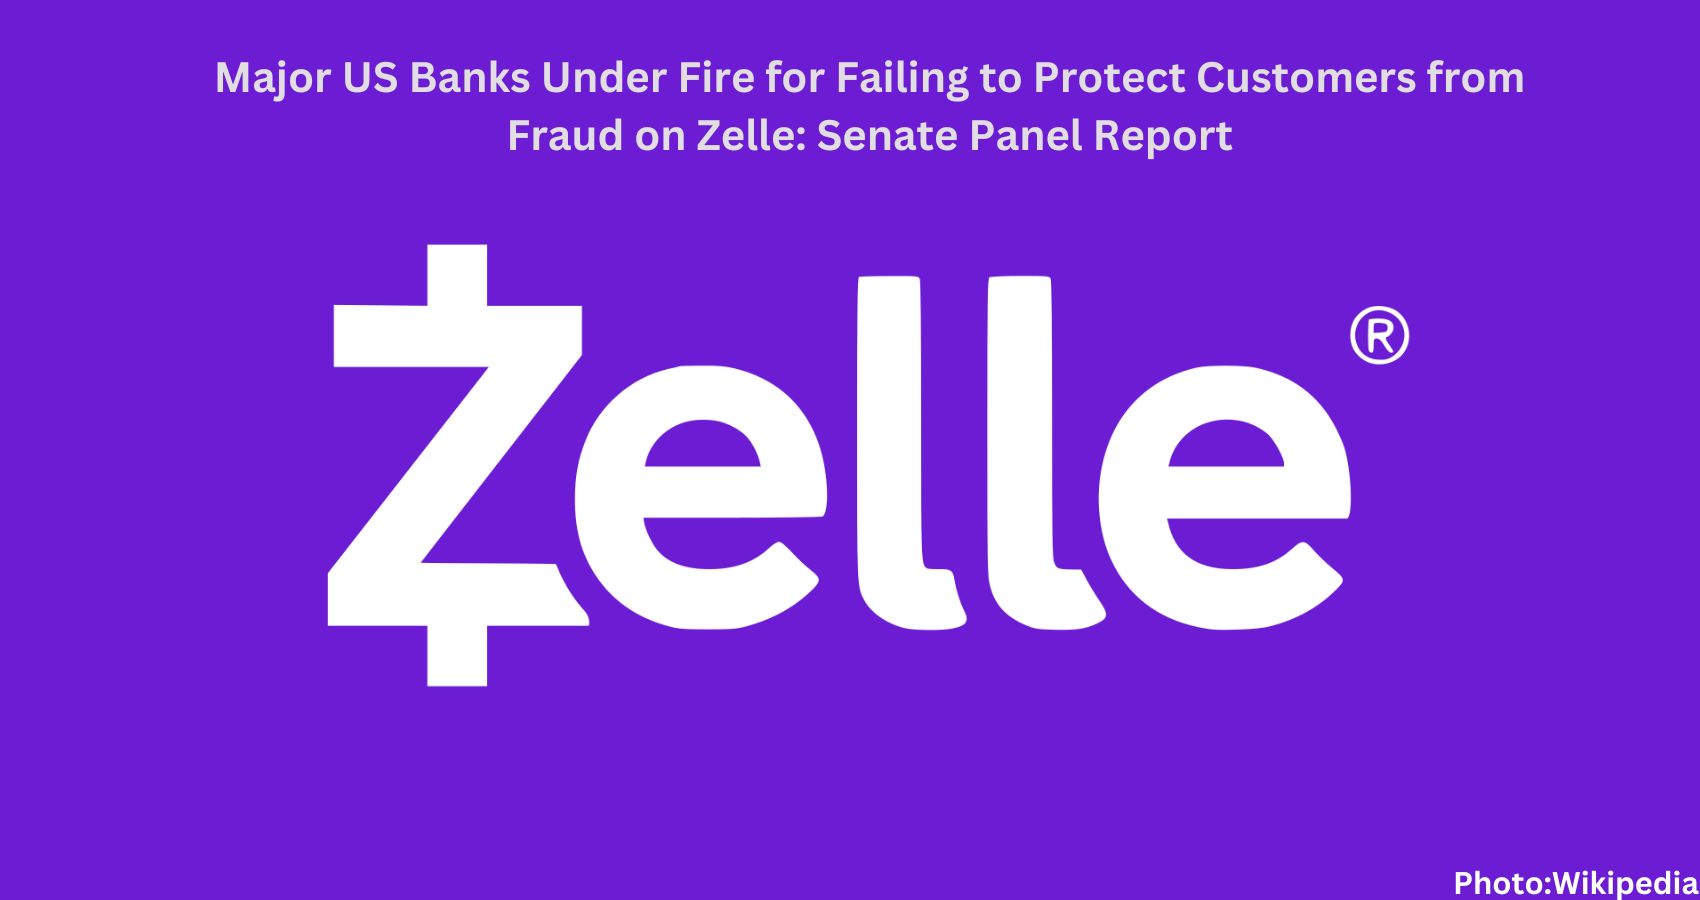 Feature and Cover Major US Banks Under Fire for Failing to Protect Customers from Fraud on Zelle Senate Panel Report